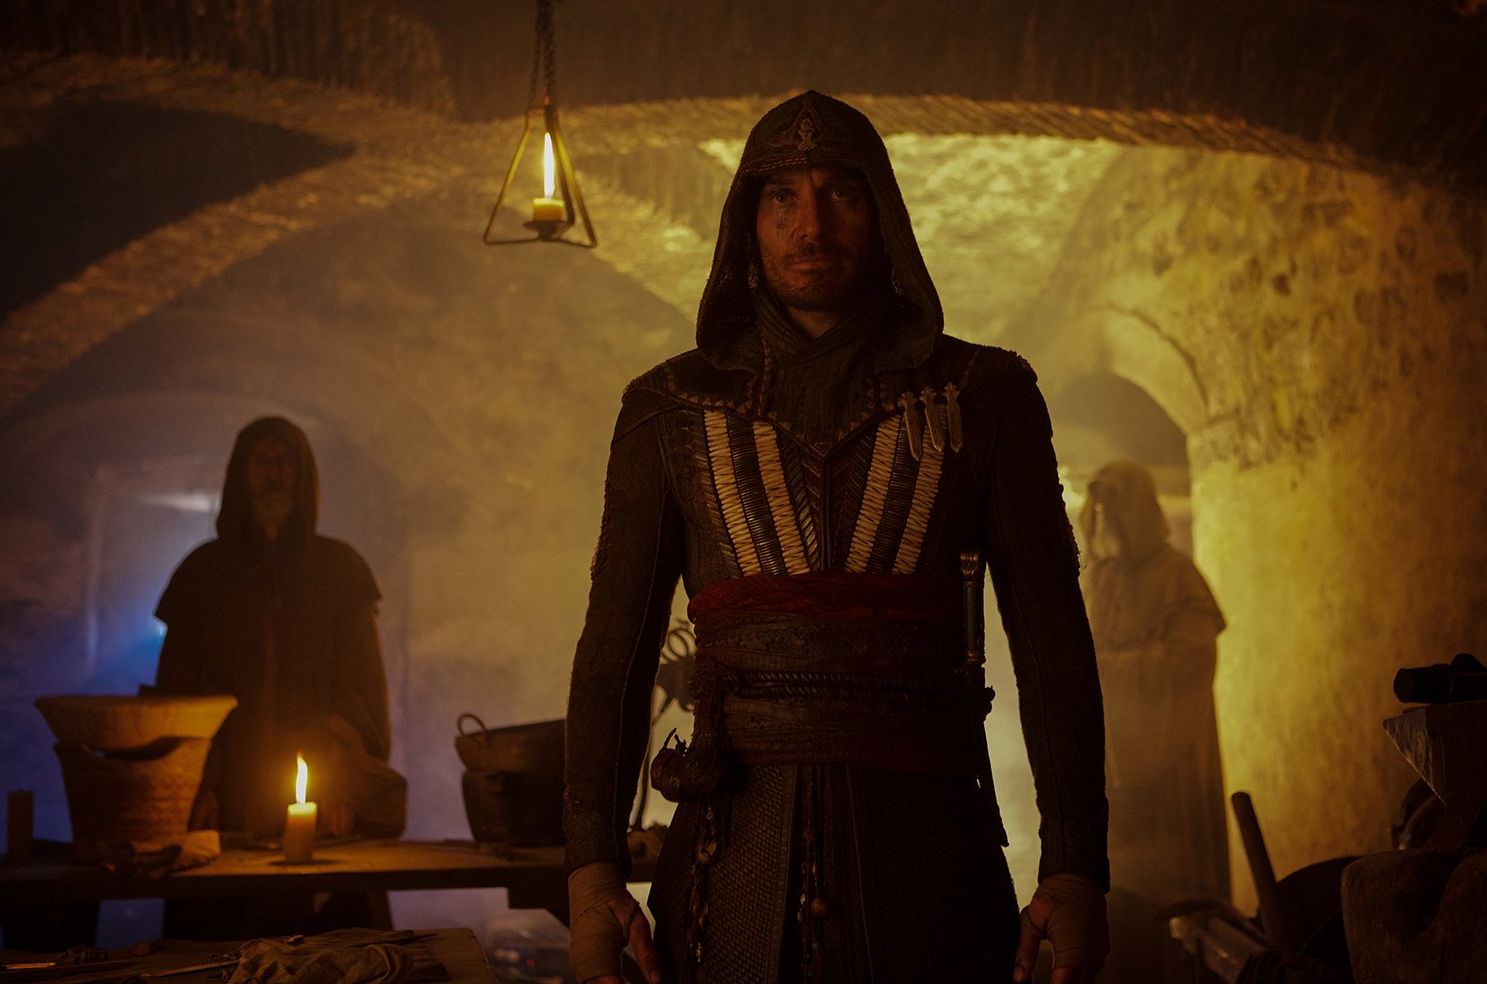 A new look at Michael Fassbender in 'Assassin's Creed'